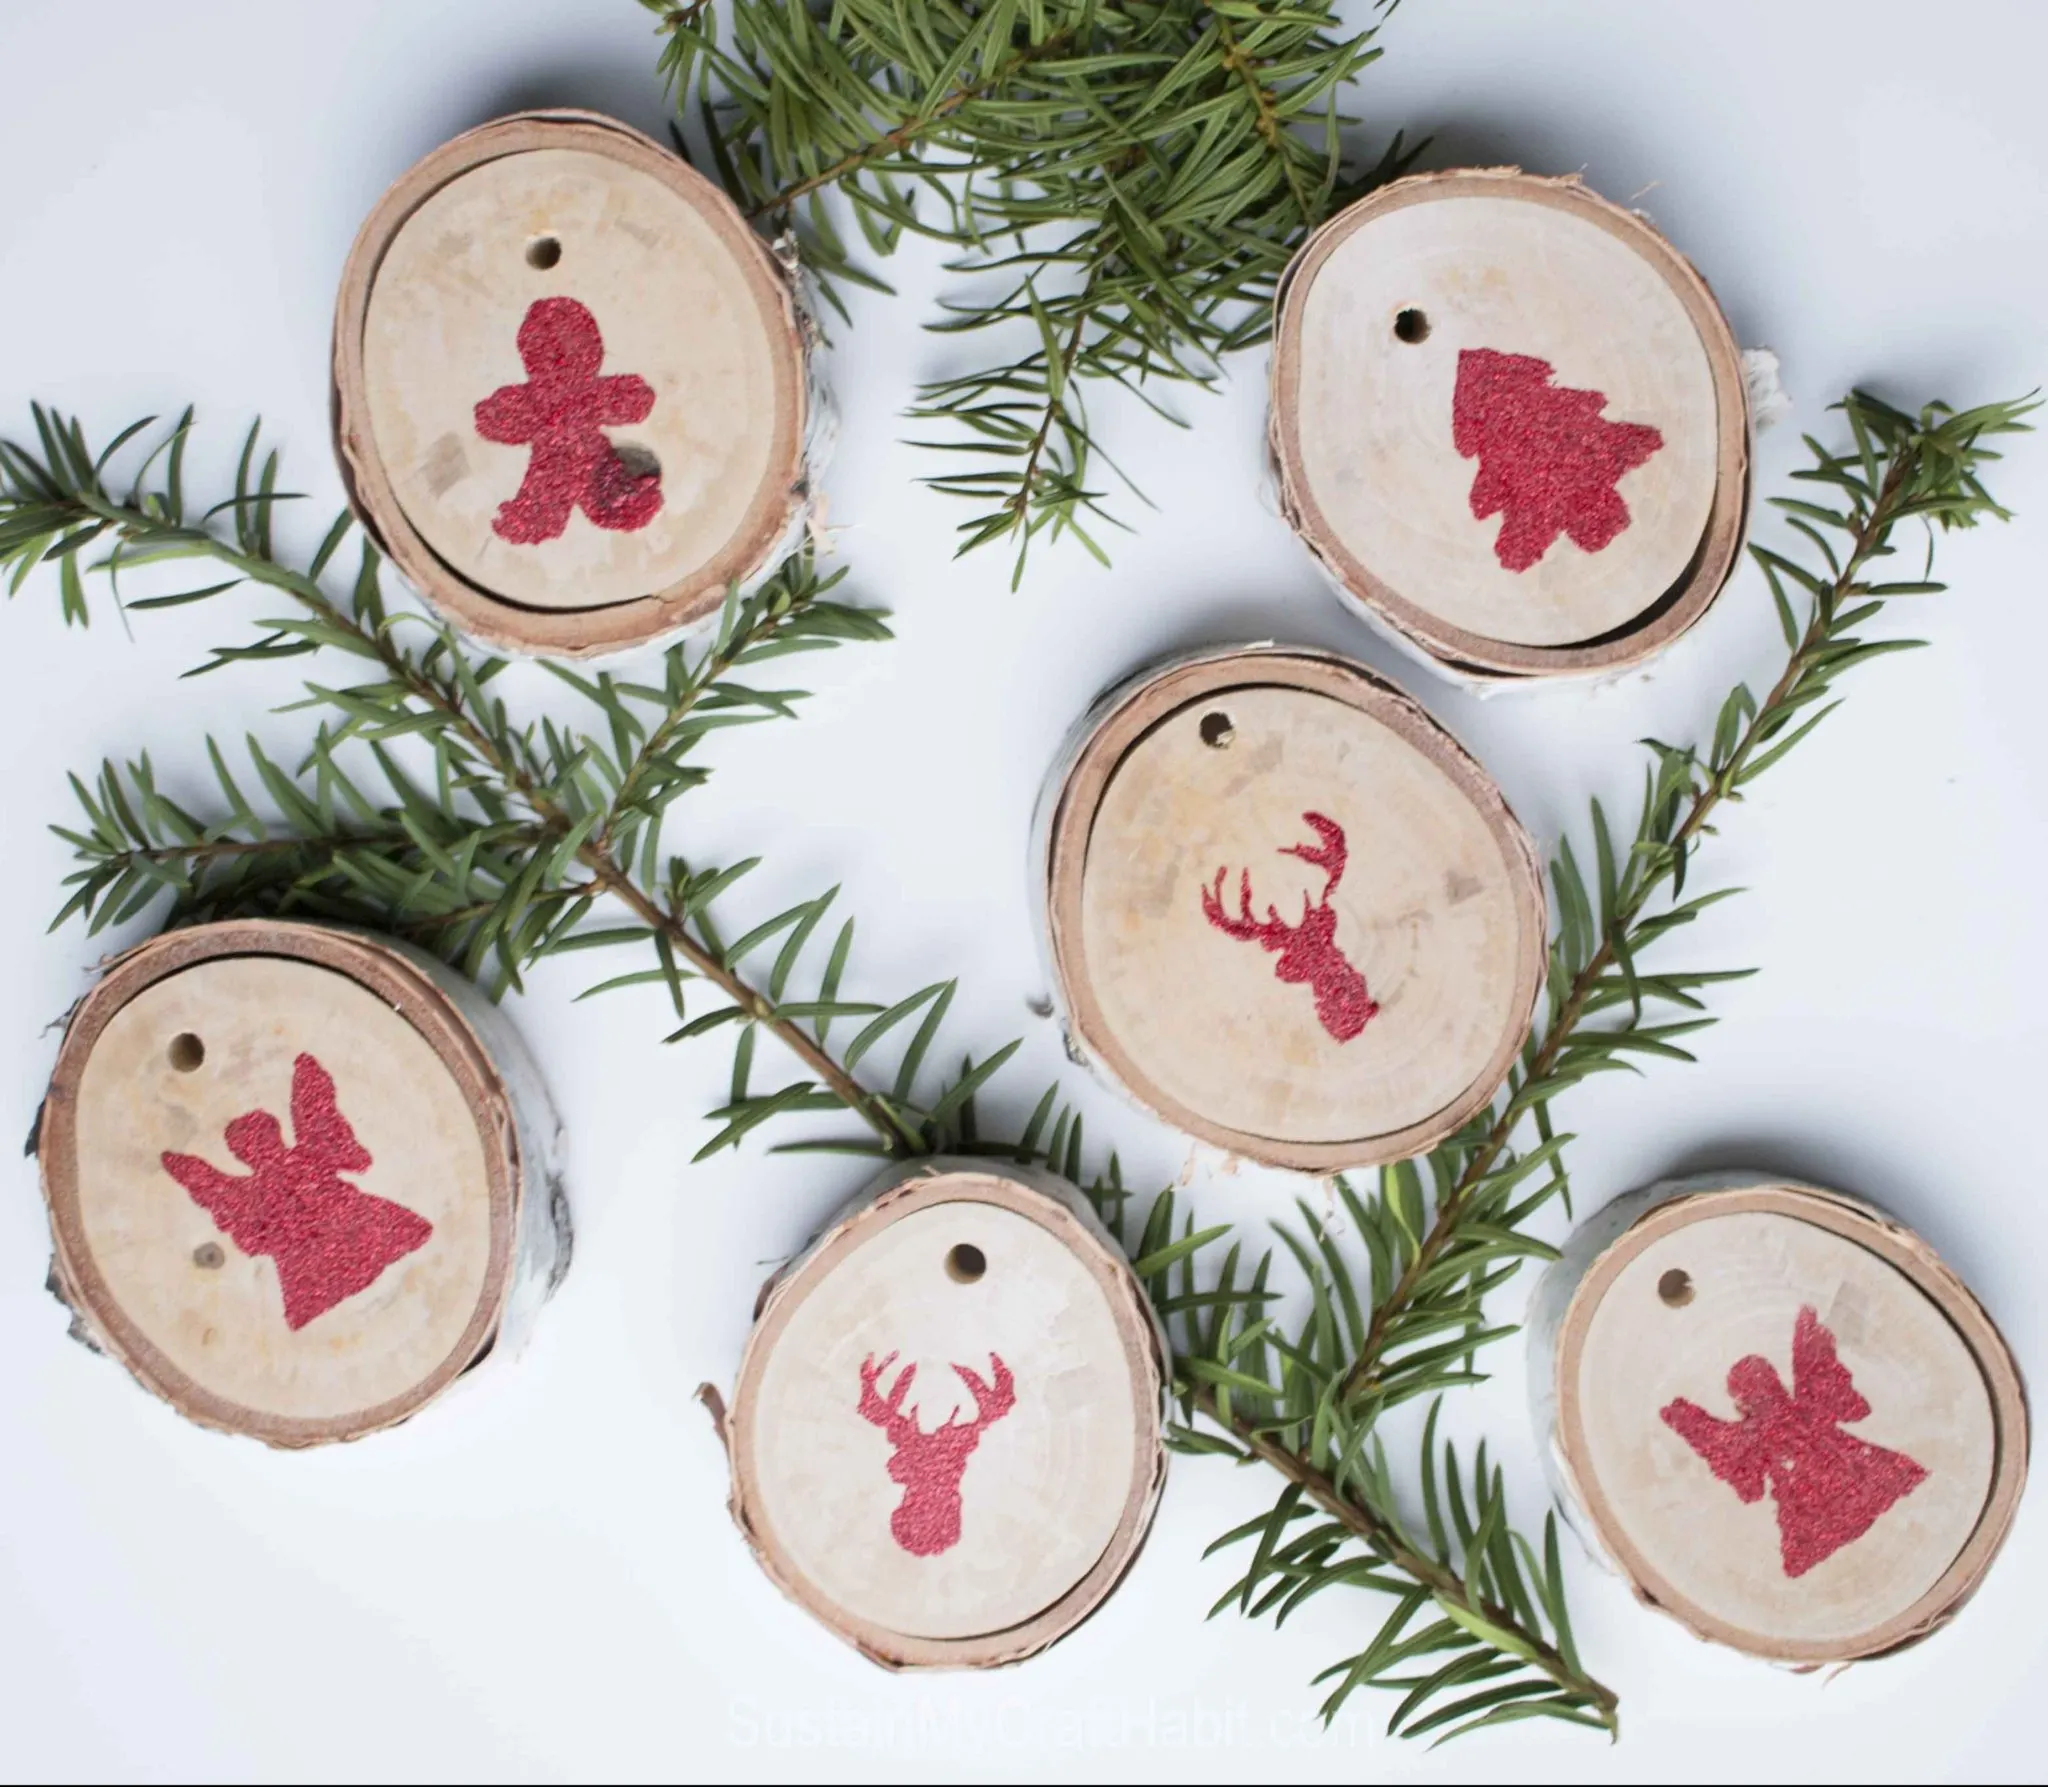 Create beautiful and rustic wood slice ornaments with a bit of red glitter. Great to decorate your home, Christmas tree or gift bags!